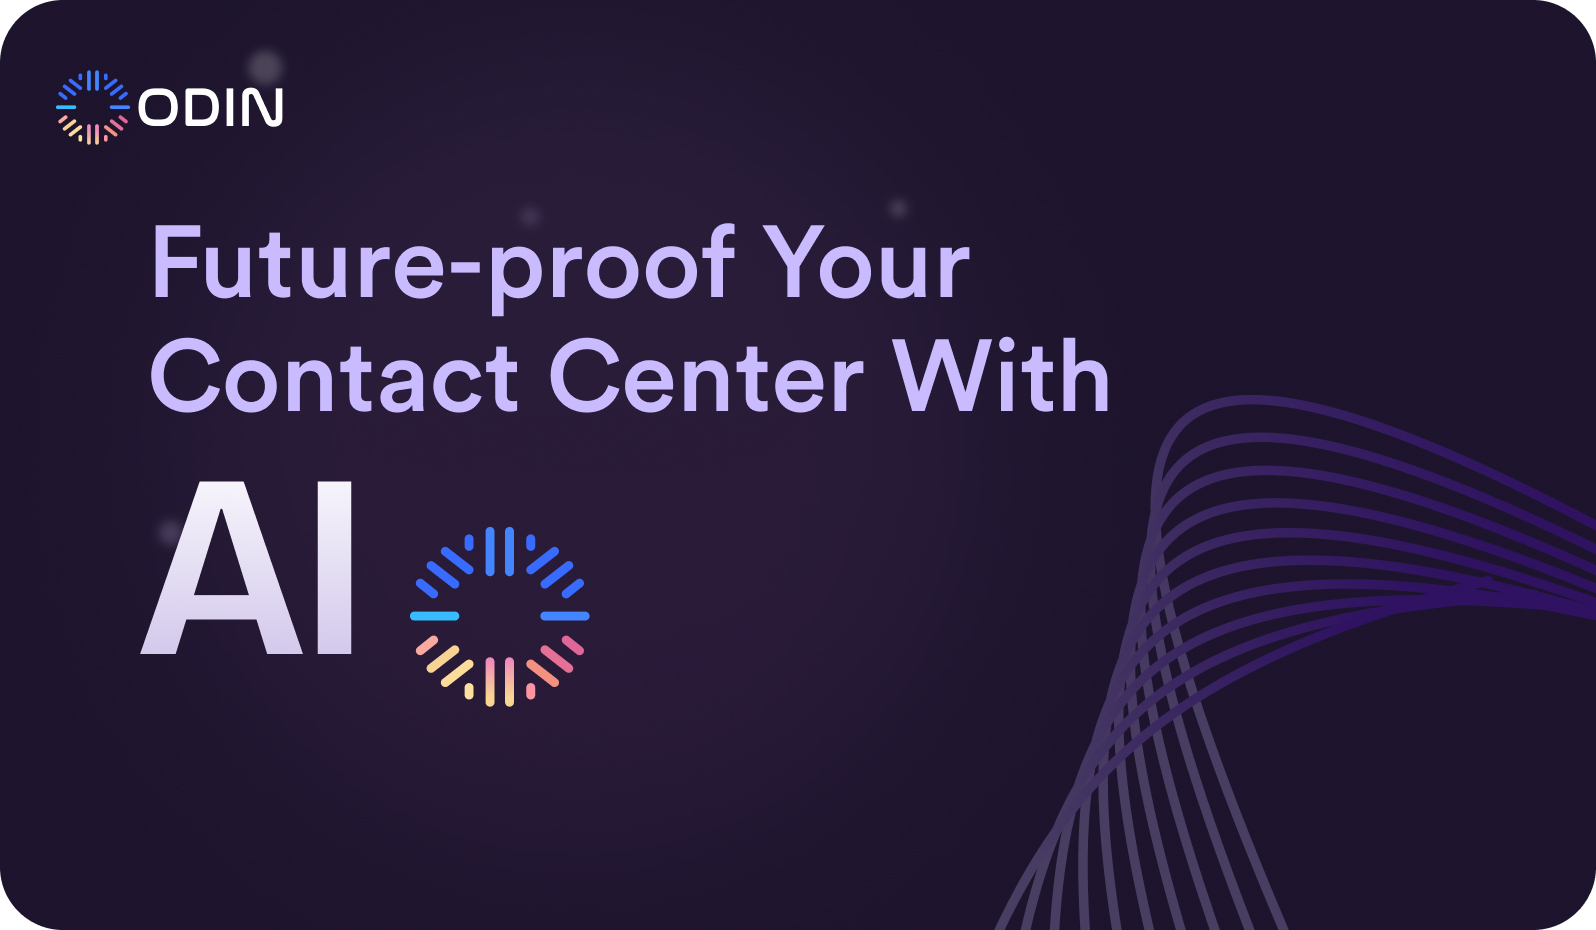 Future-proof your contact center with AI, showcasing Odin AI's solutions to enhance operational efficiency and customer satisfaction.